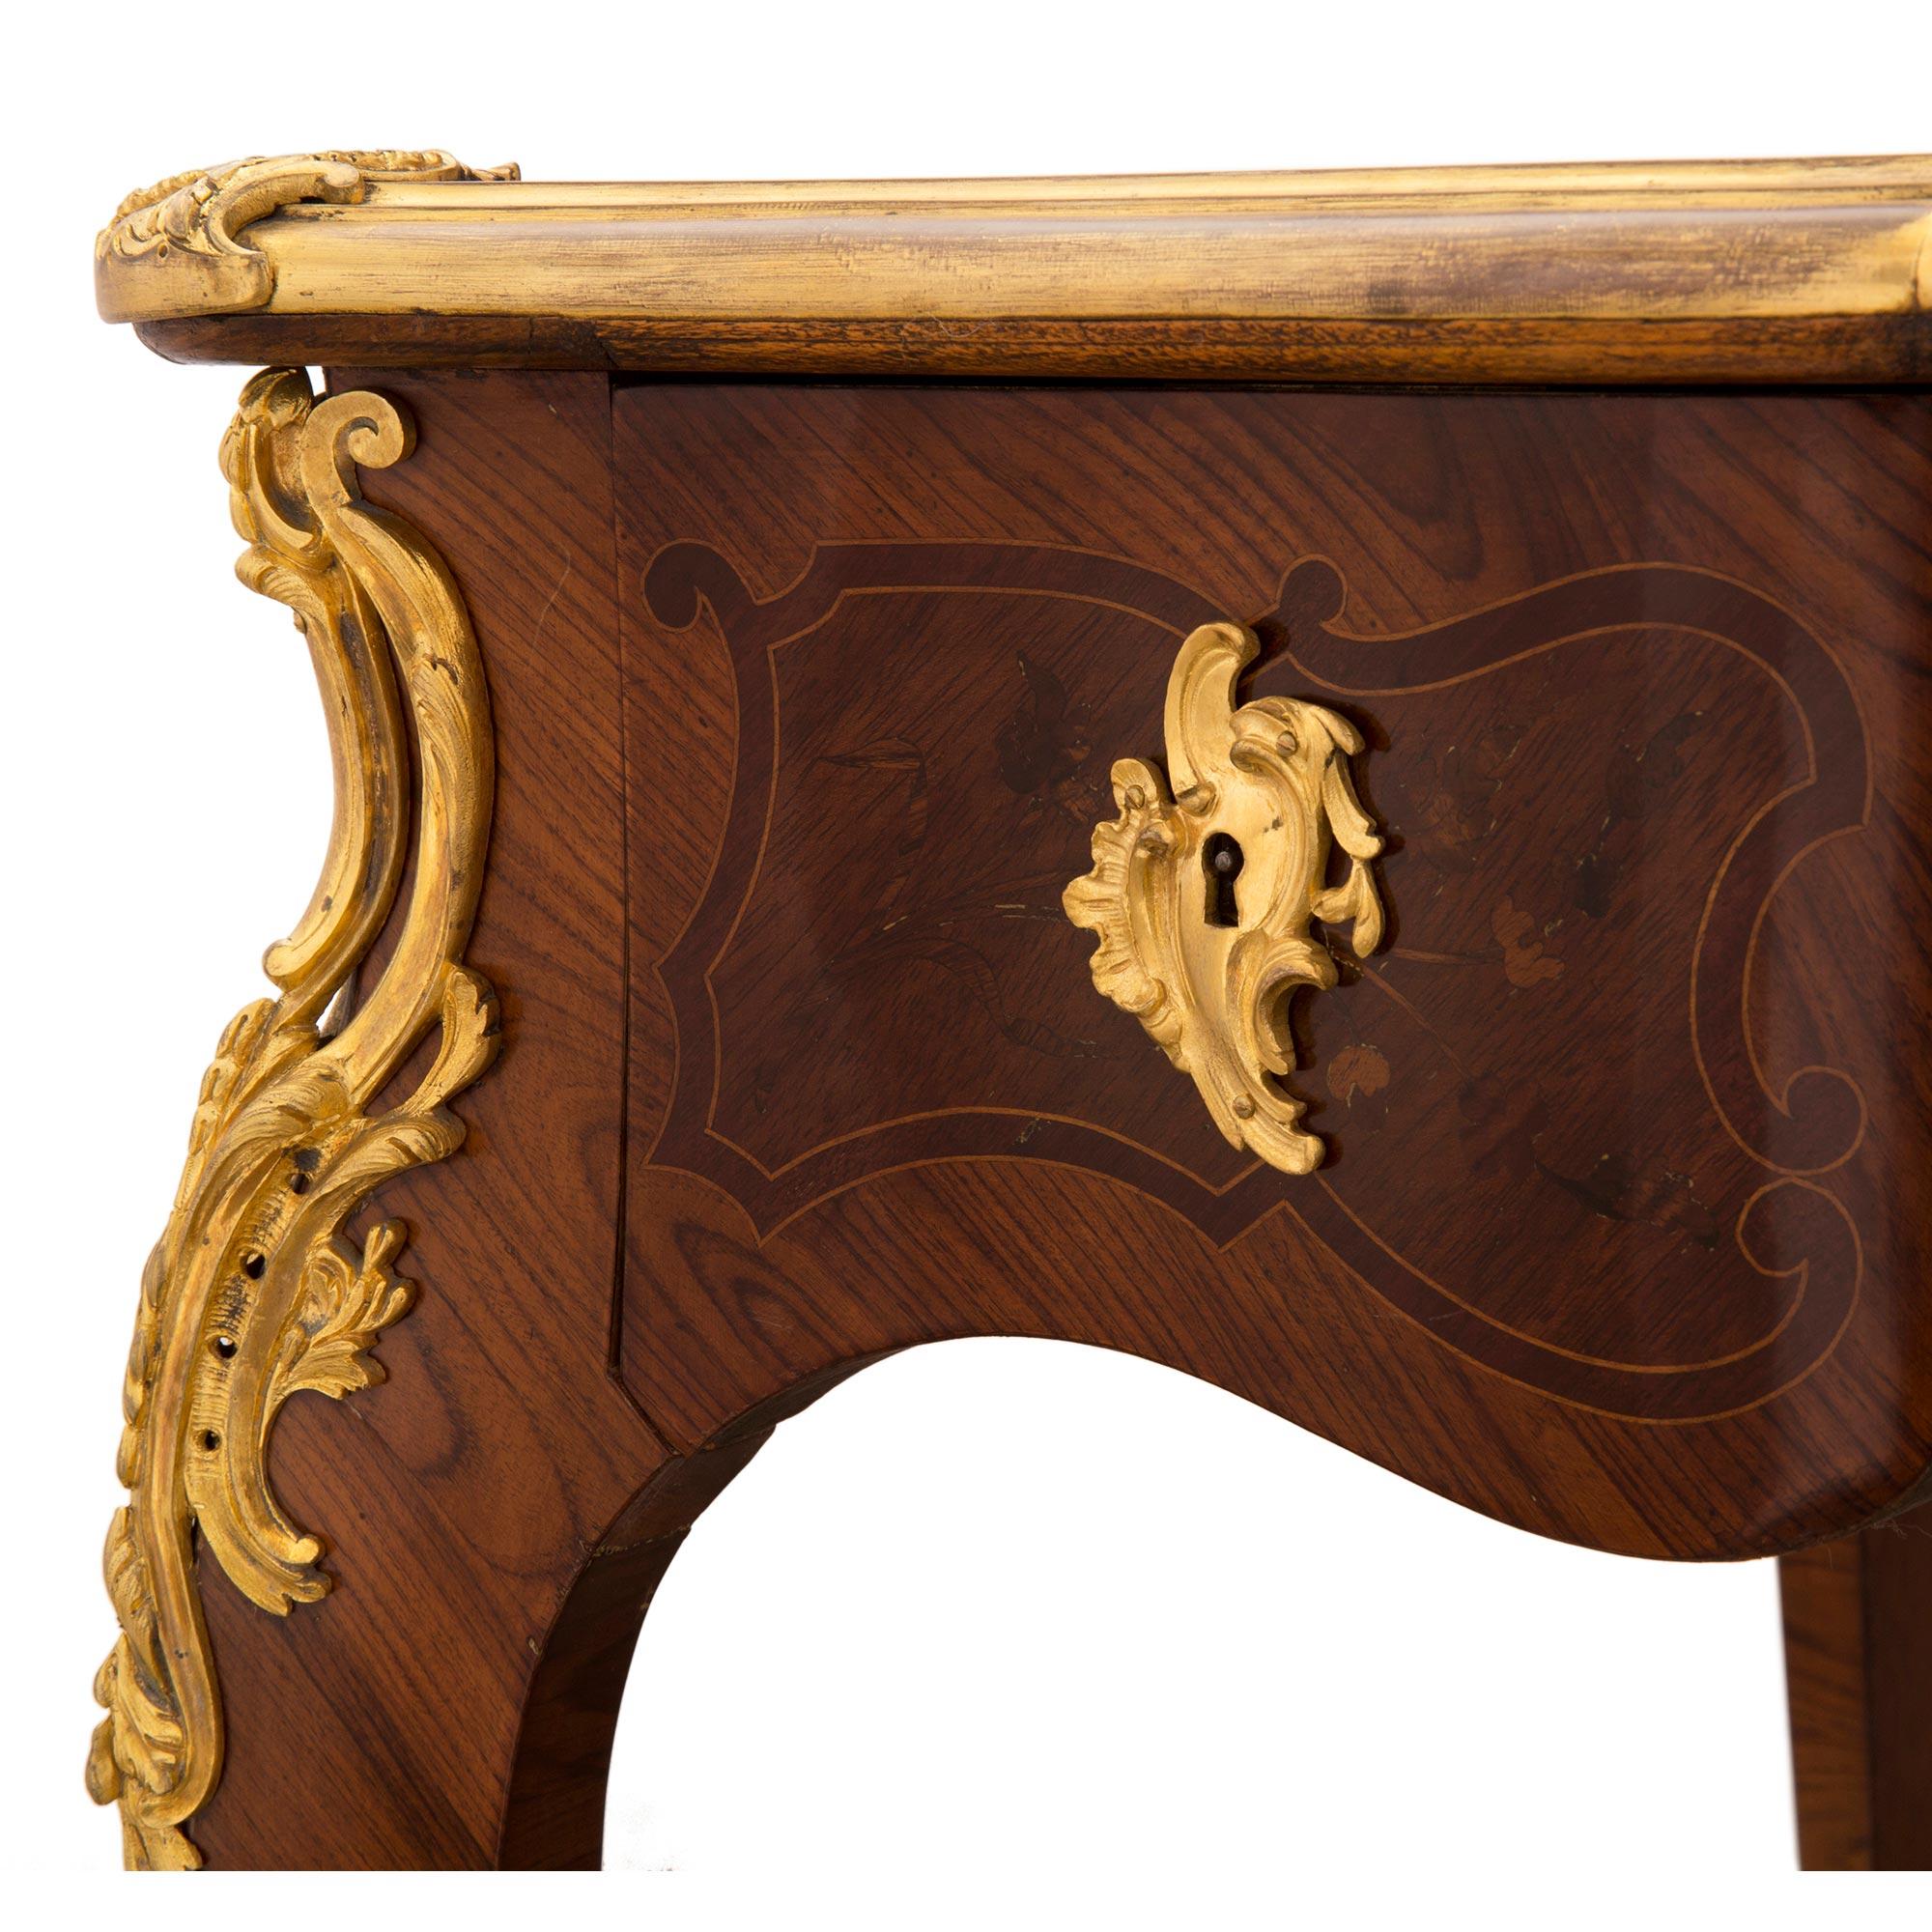 French 19th Century Louis XV Style Kingwood, Tulipwood, Ormolu and Leather Desk For Sale 3